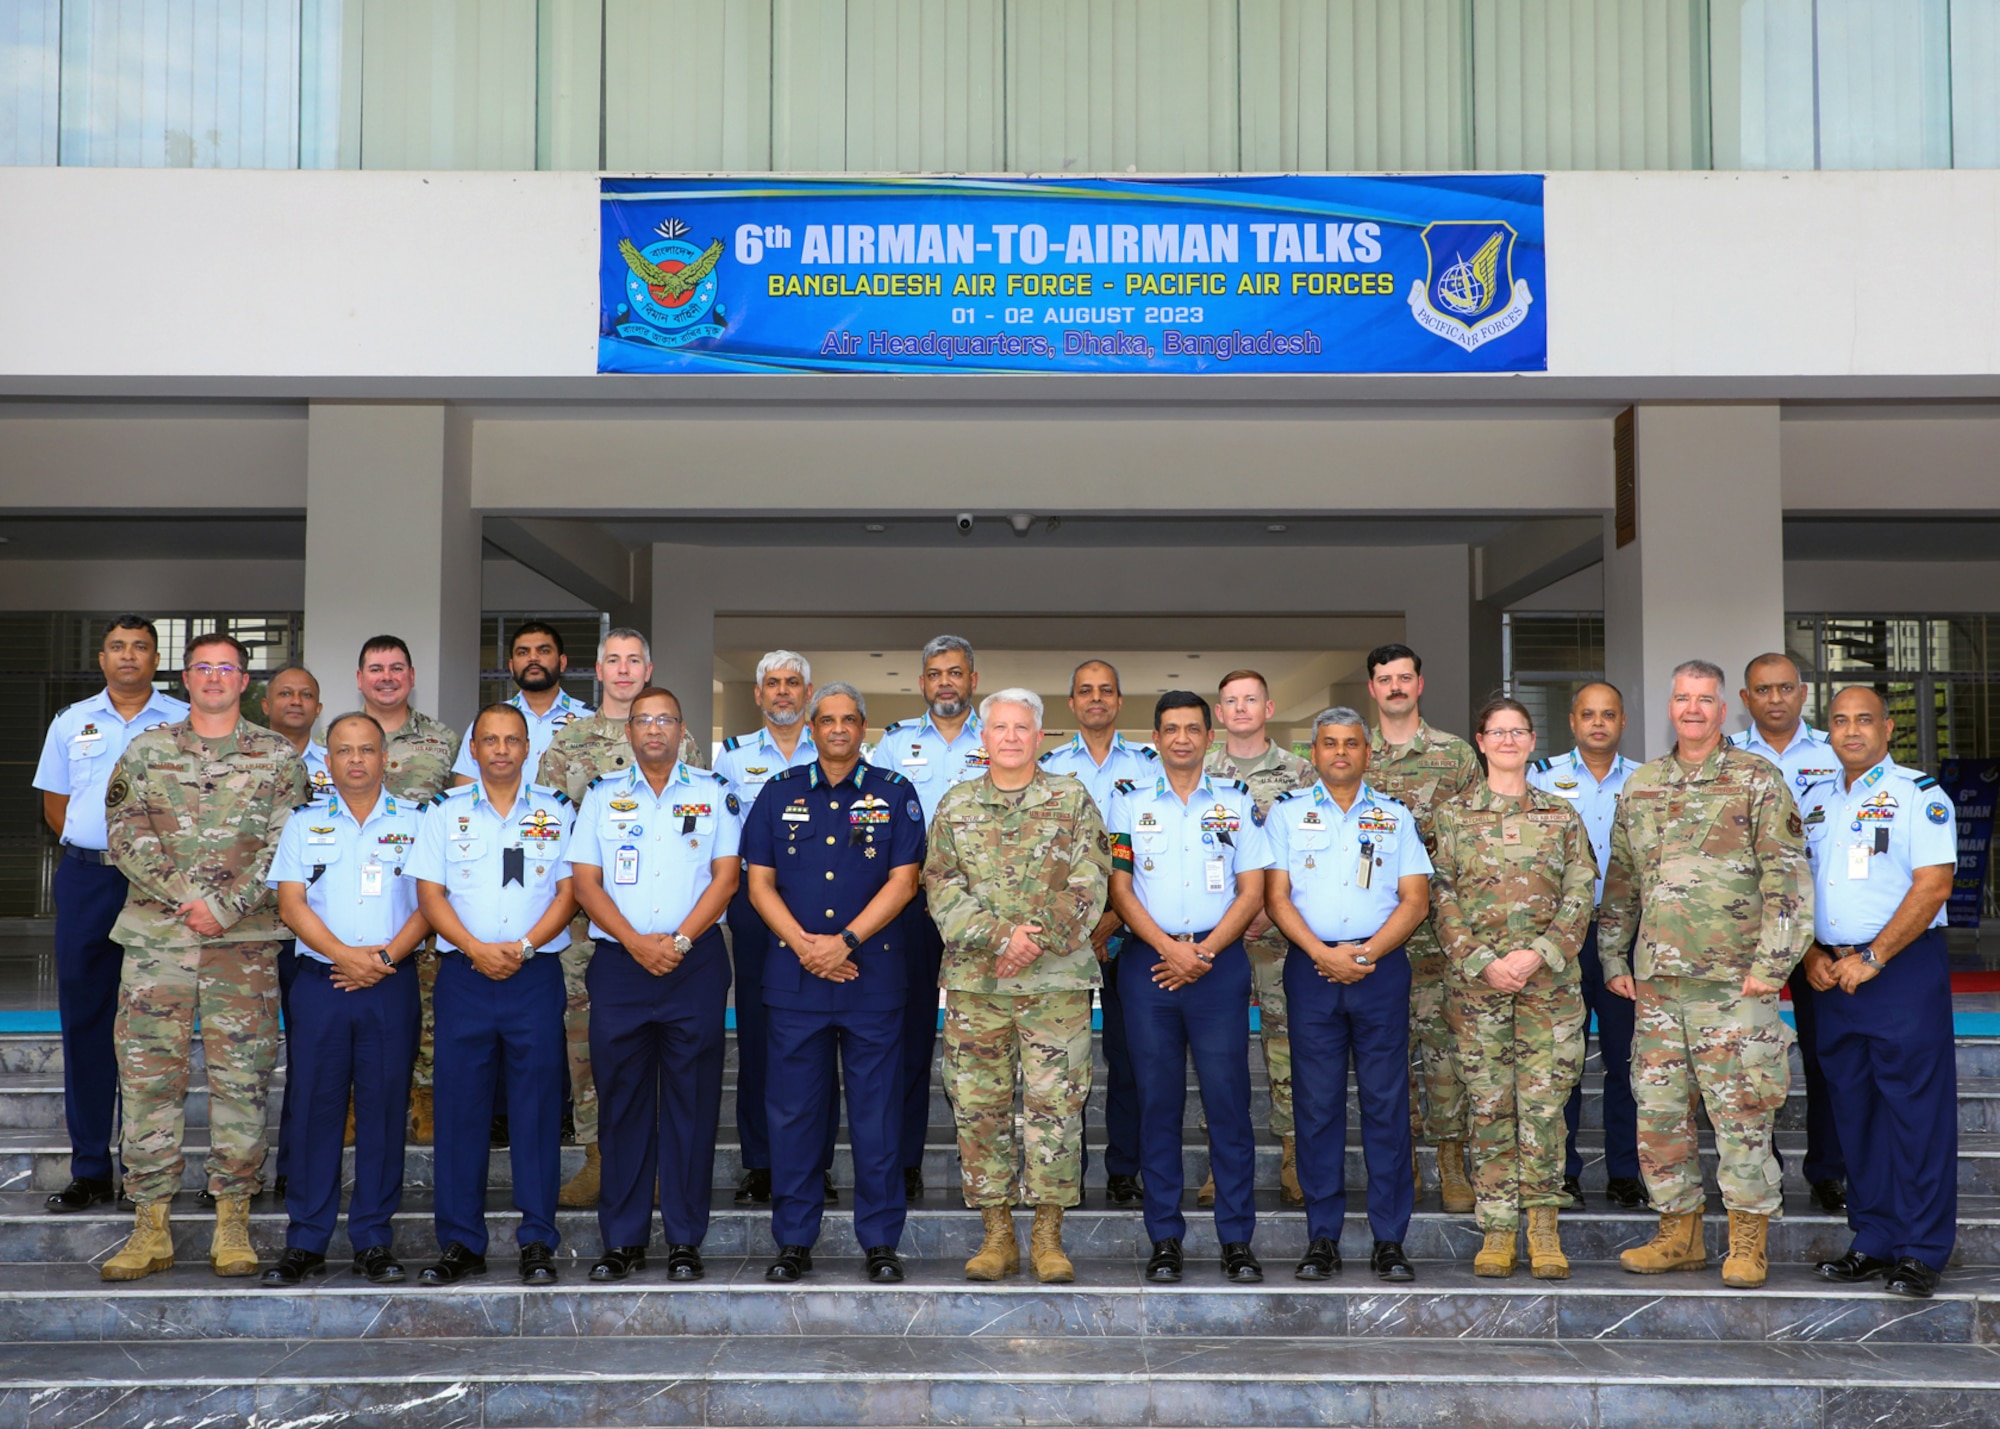 Photo of U.S. Air Force and Bangladesh Air Force personnel at a conference